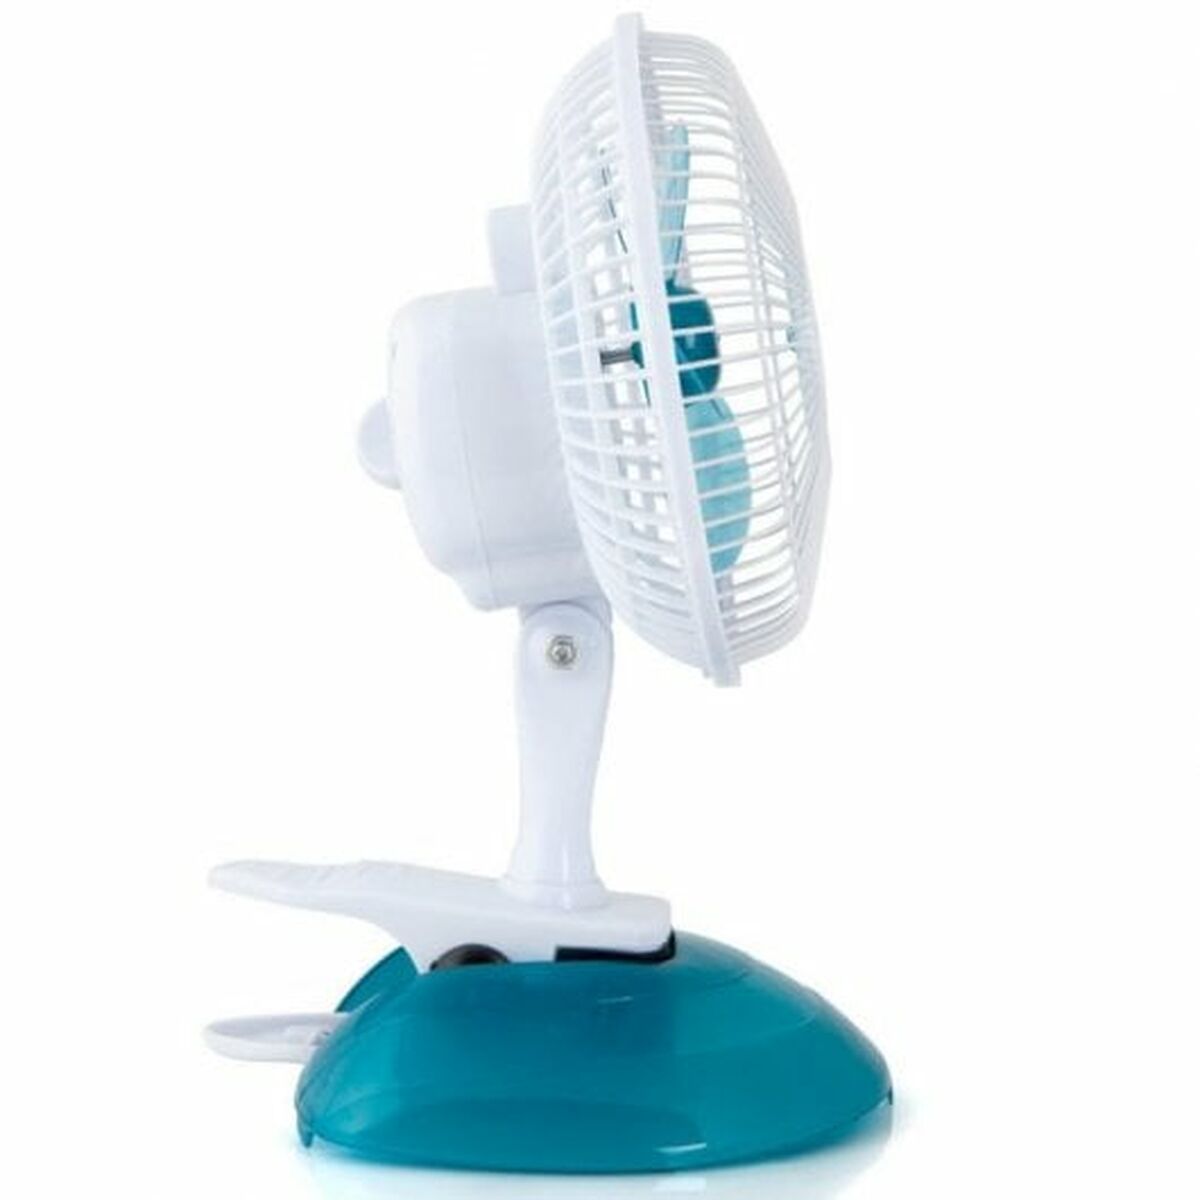 Table Fan Orbegozo TF 0219 8 W, Orbegozo, Home and cooking, Portable air conditioning, table-fan-orbegozo-tf-0219-8-w-1, Brand_Orbegozo, category-reference-2399, category-reference-2450, category-reference-2451, Condition_NEW, ferretería, Price_20 - 50, summer, RiotNook